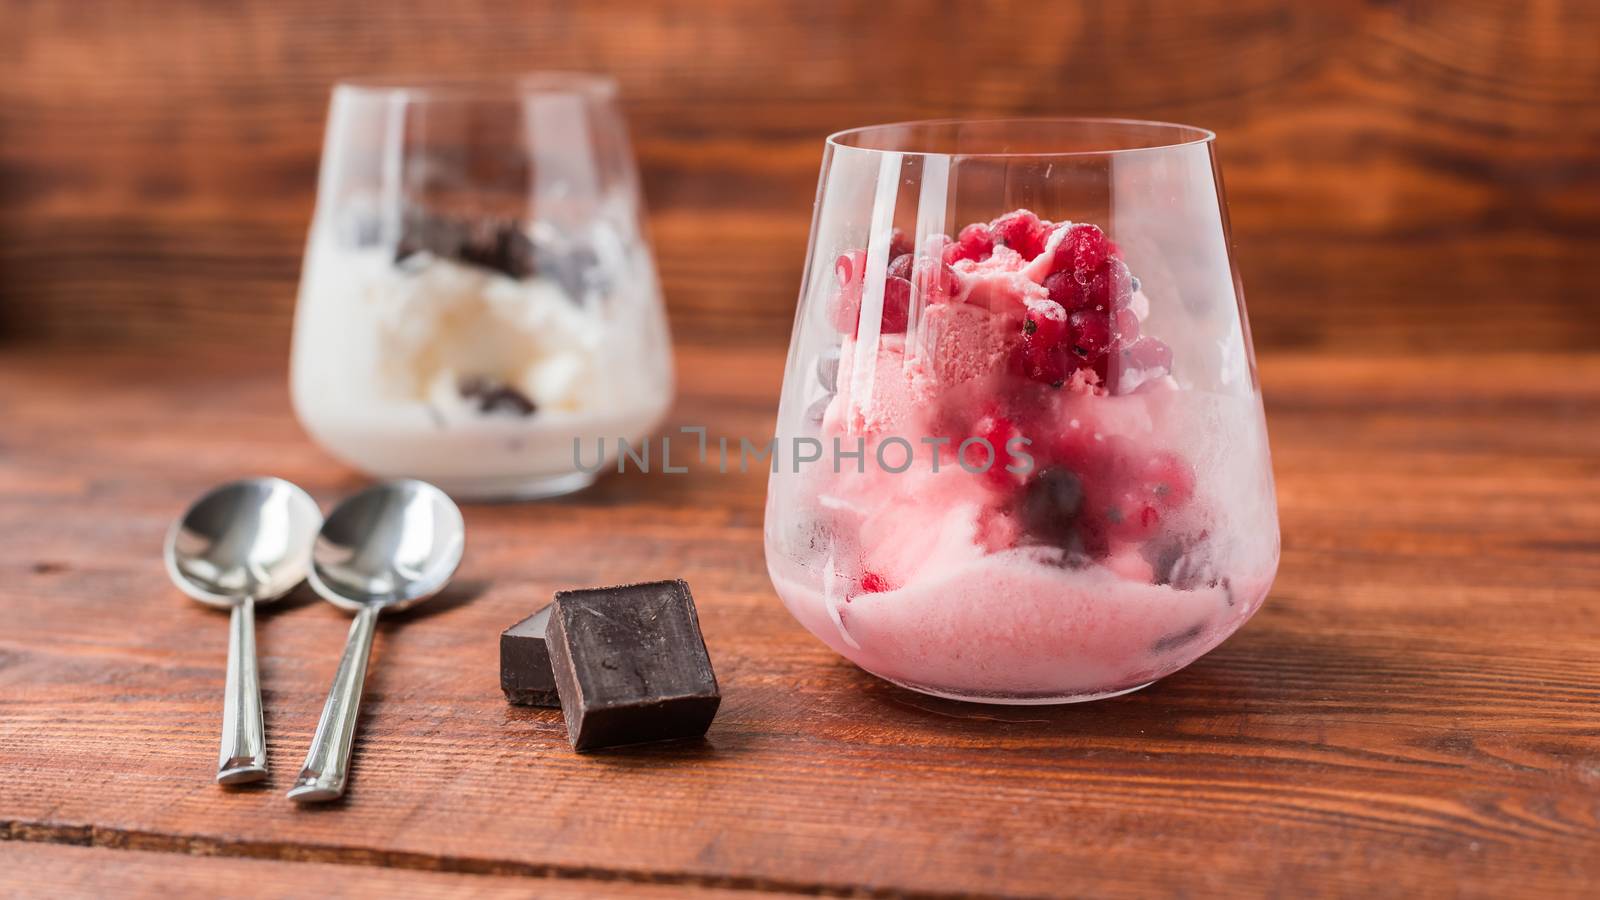 White and pink ice cream in glass on wooden table. Sweet desert